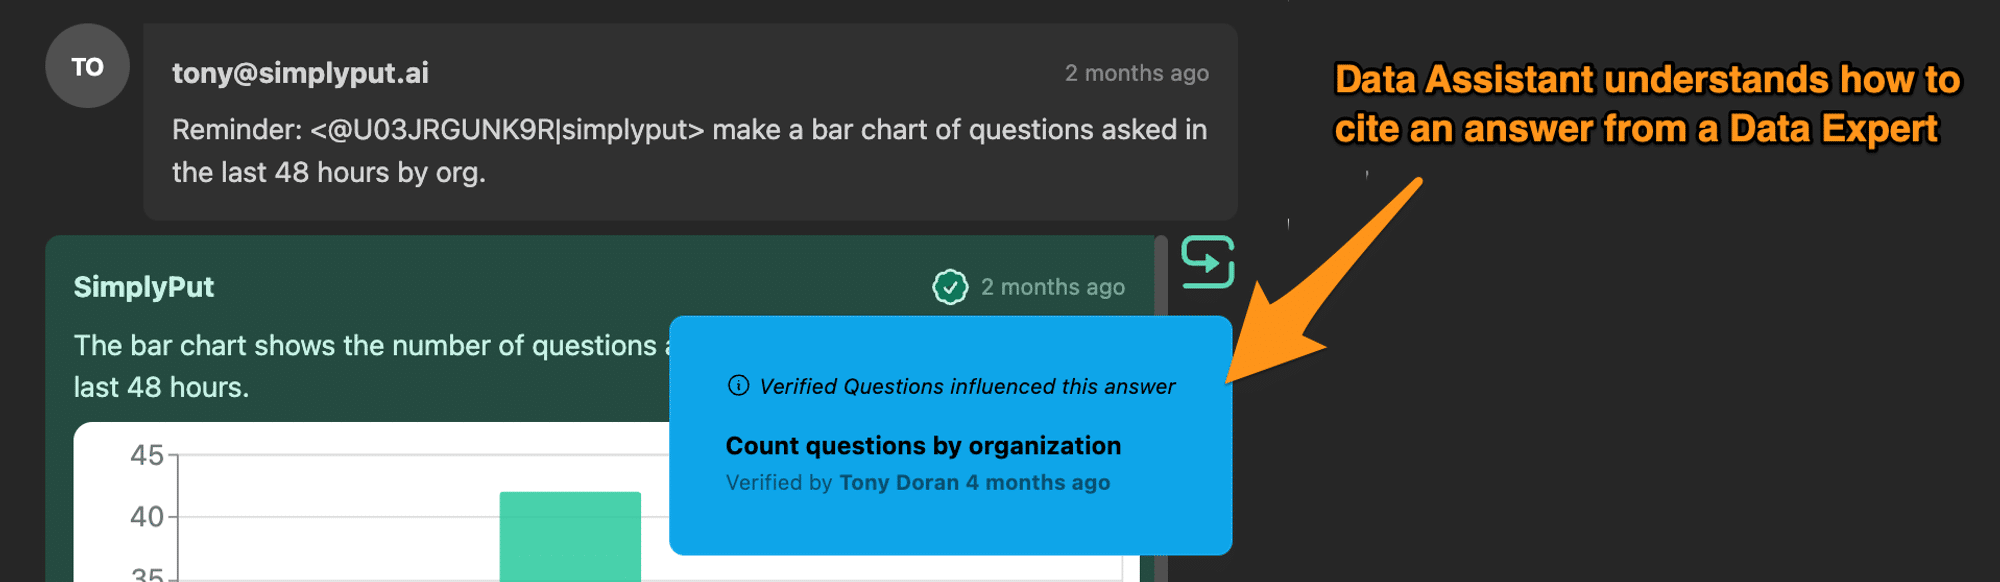 Screenshot showing an email reminder to create a bar chart of questions asked by organization in the last 48 hours. The response from SimplyPut presents a bar chart detailing the number of questions asked. An information bubble indicates the answer is influenced by verified questions, with a verification note from Tony Doran 4 months ago. A highlight suggests that the Data Assistant understands how to cite an answer from a Data Expert.